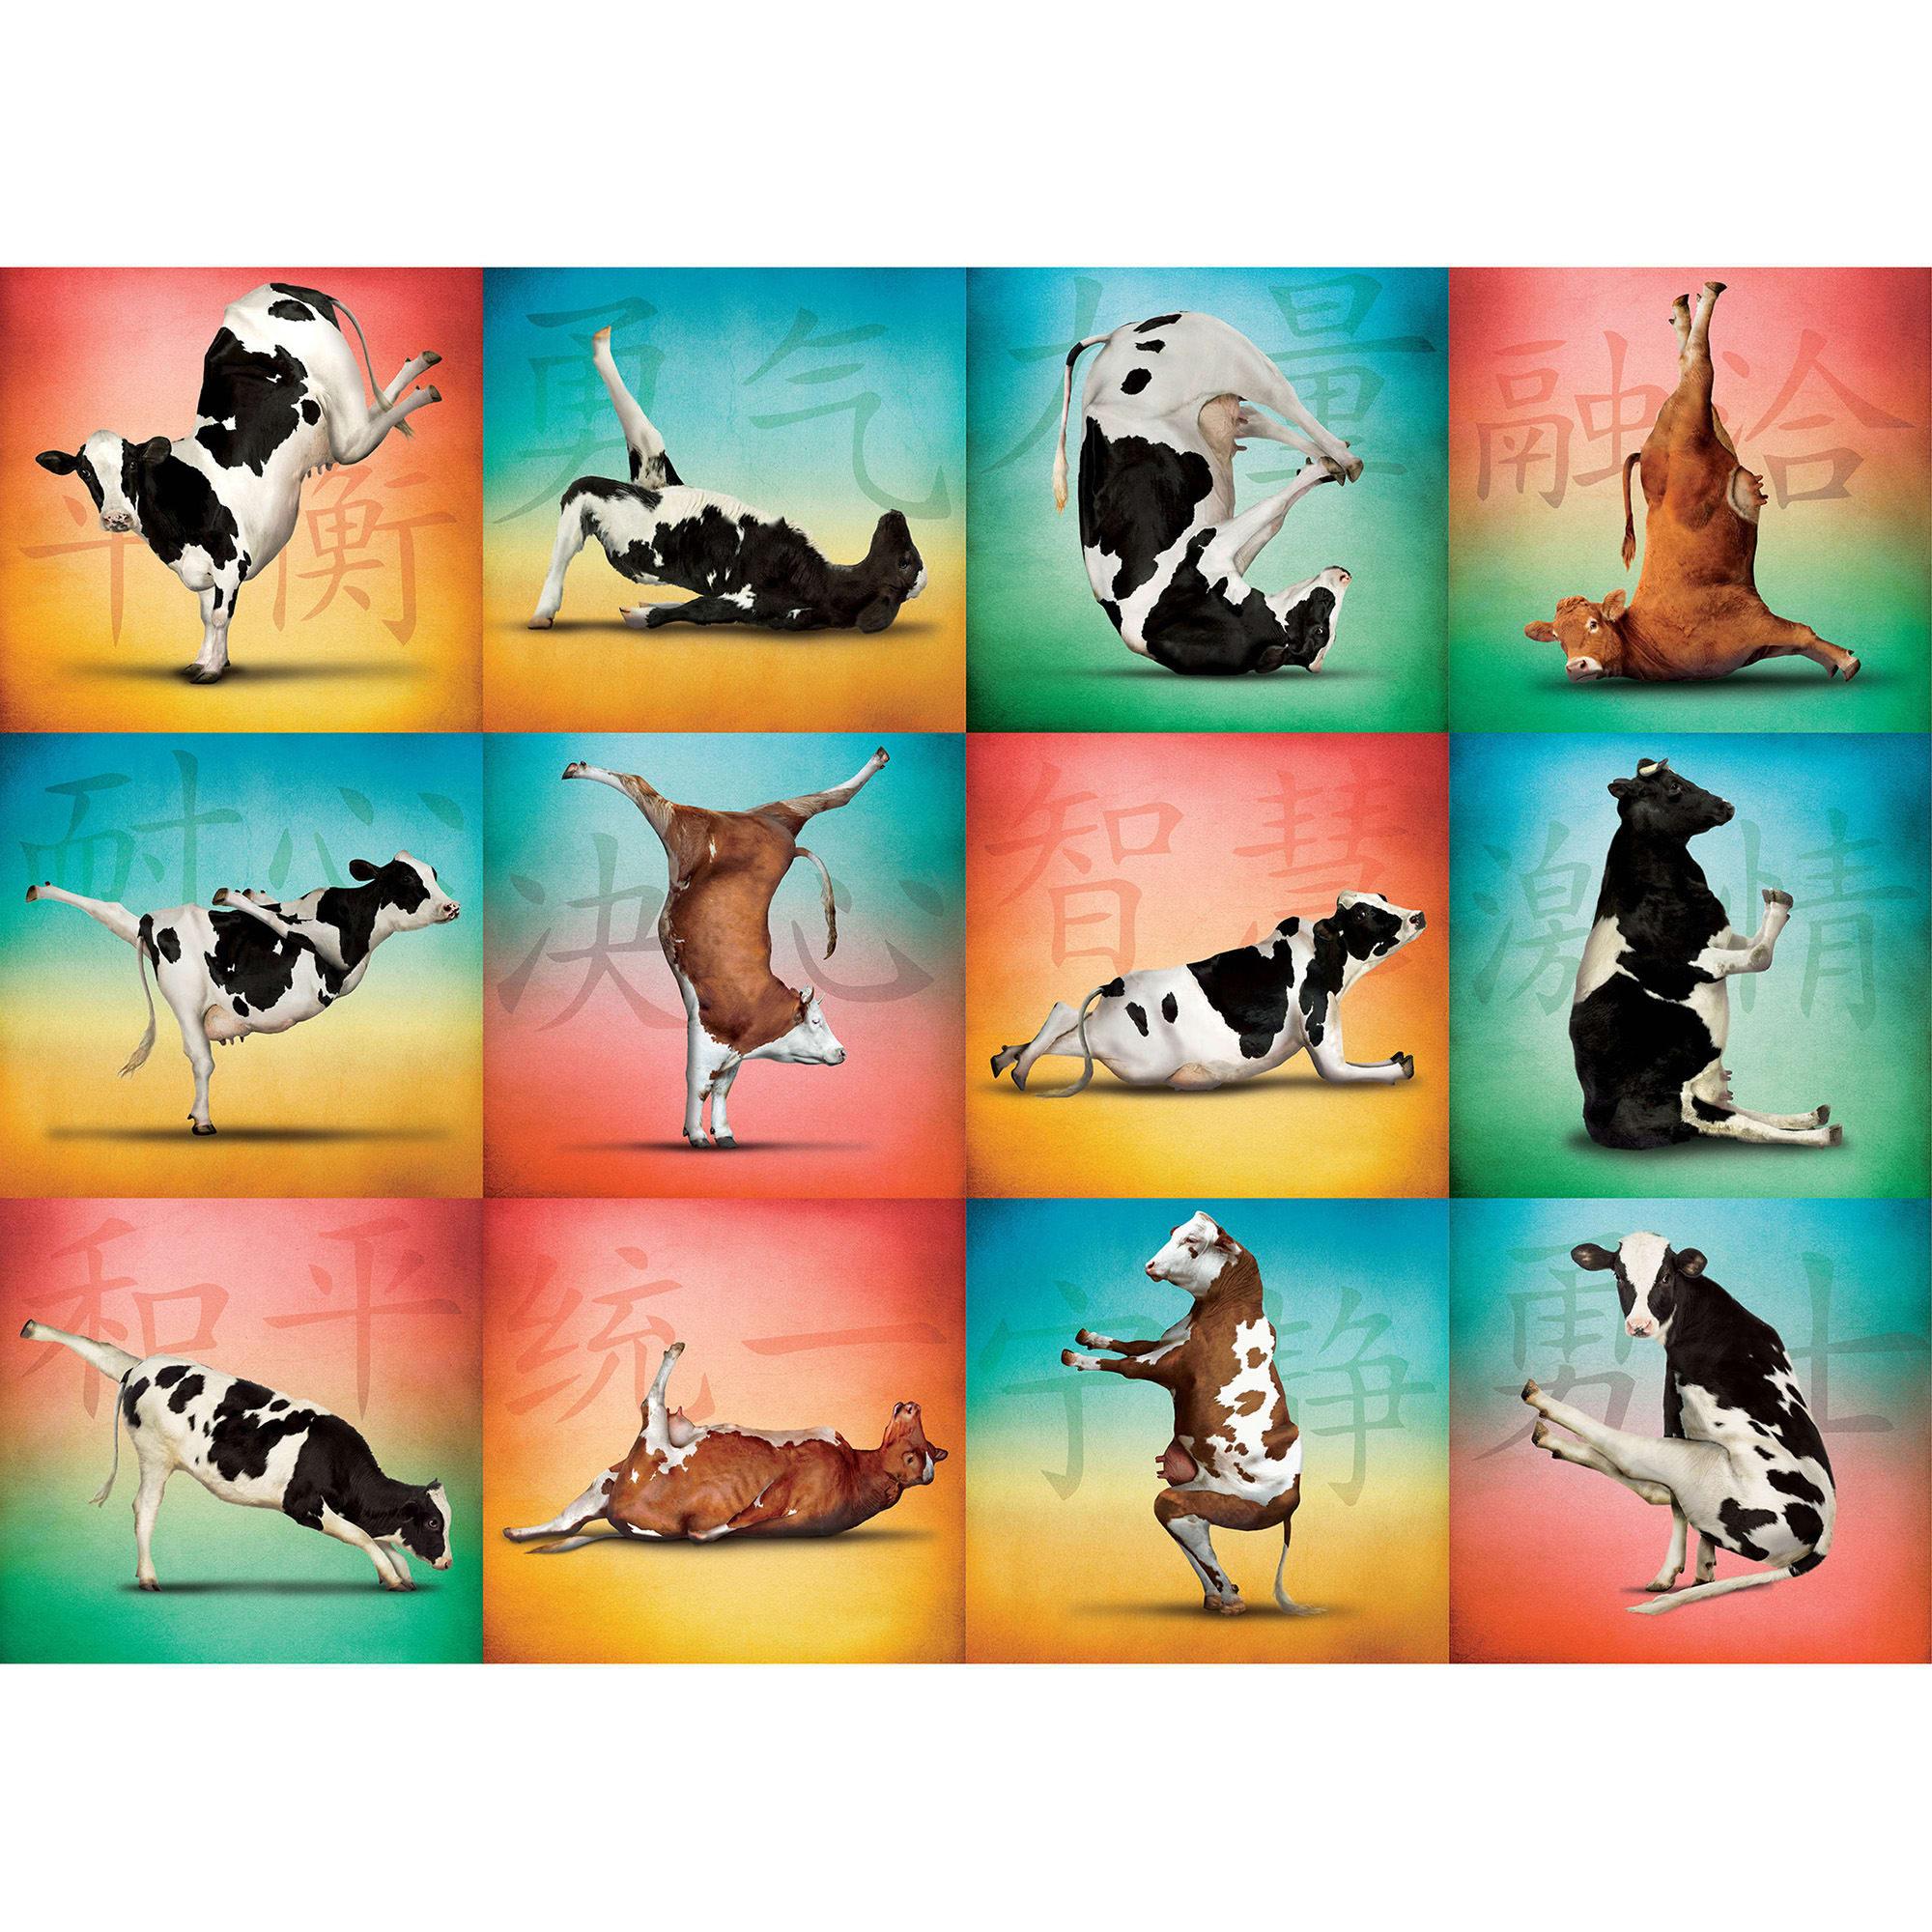 ISBN 9781623439637 product image for Willow Creek Press Cow Yoga 1000-Piece Puzzle | upcitemdb.com